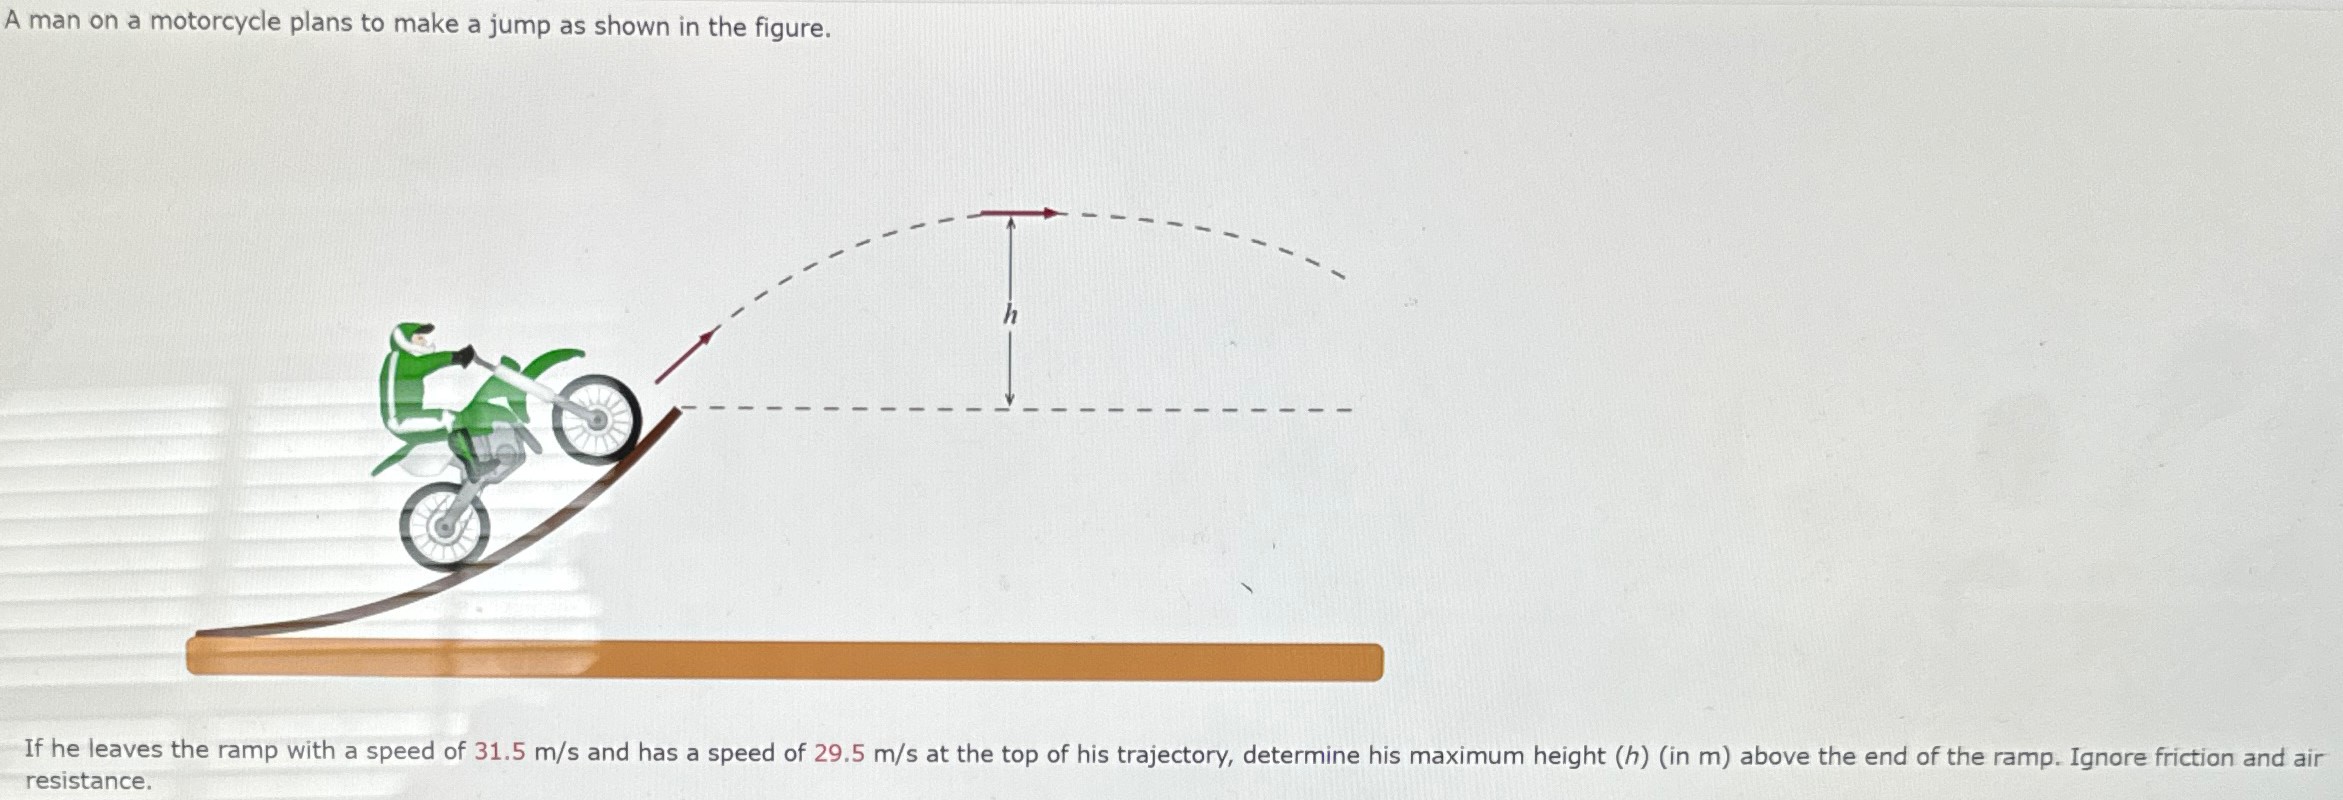 A man on a motorcycle plans to make a jump as shown in the figure. If he leaves the ramp with a speed of 31.5 m/s and has a speed of 29.5 m/s at the top of his trajectory, determine his maximum height (h) (in m) above the end of the ramp. Ignore friction and air resistance.